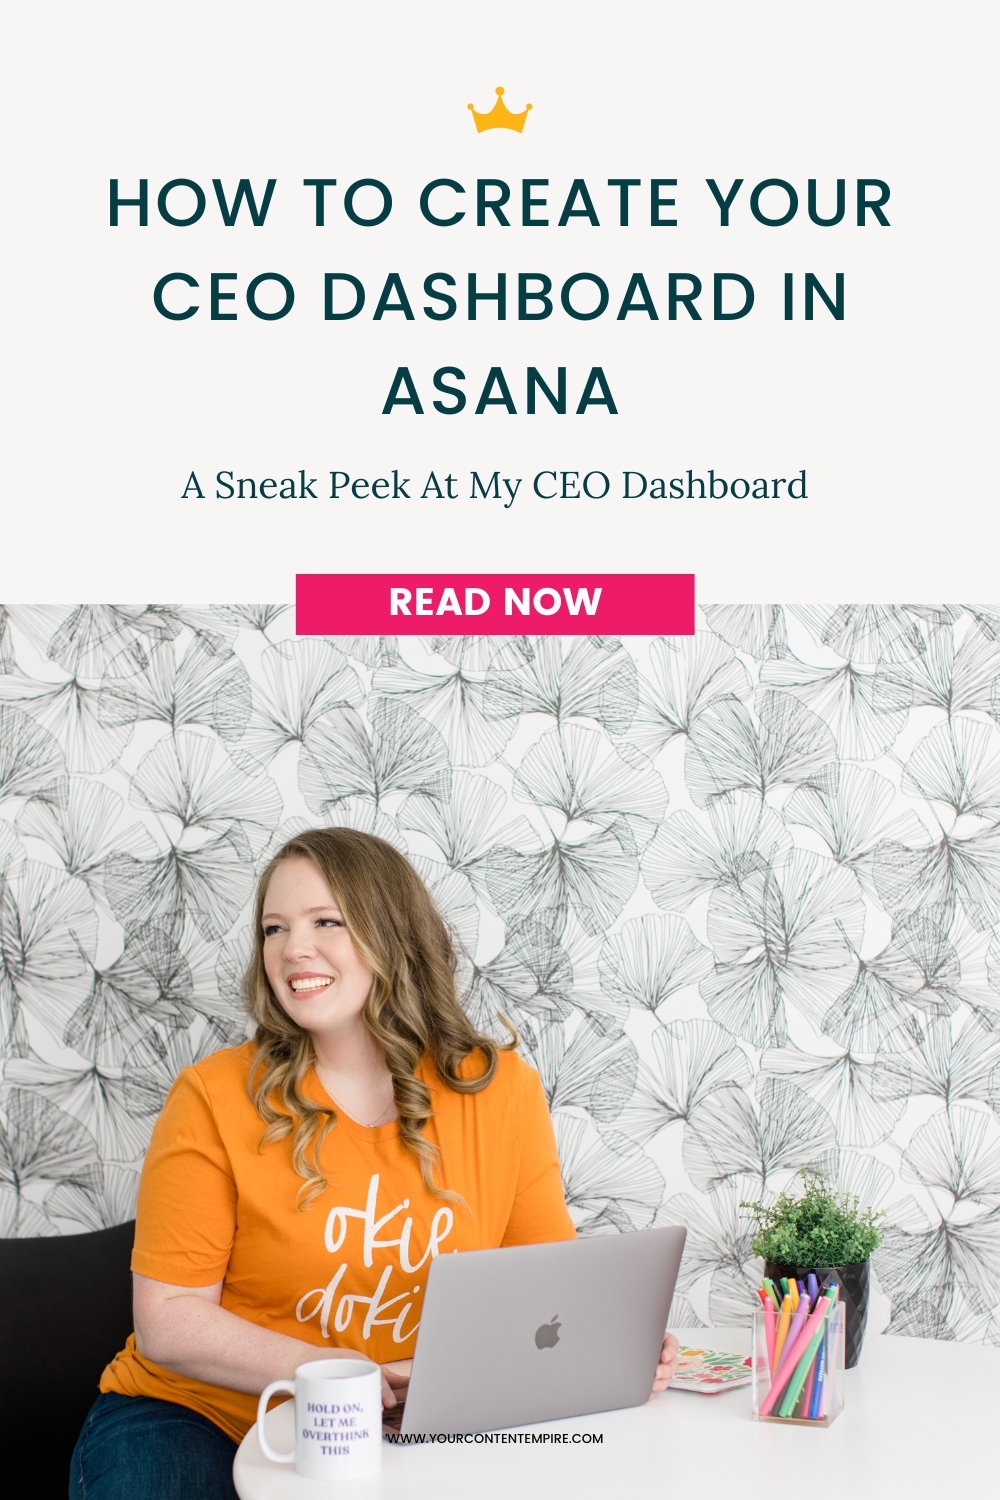 How to Create a CEO Dashboard in Asana by Your Content Empire